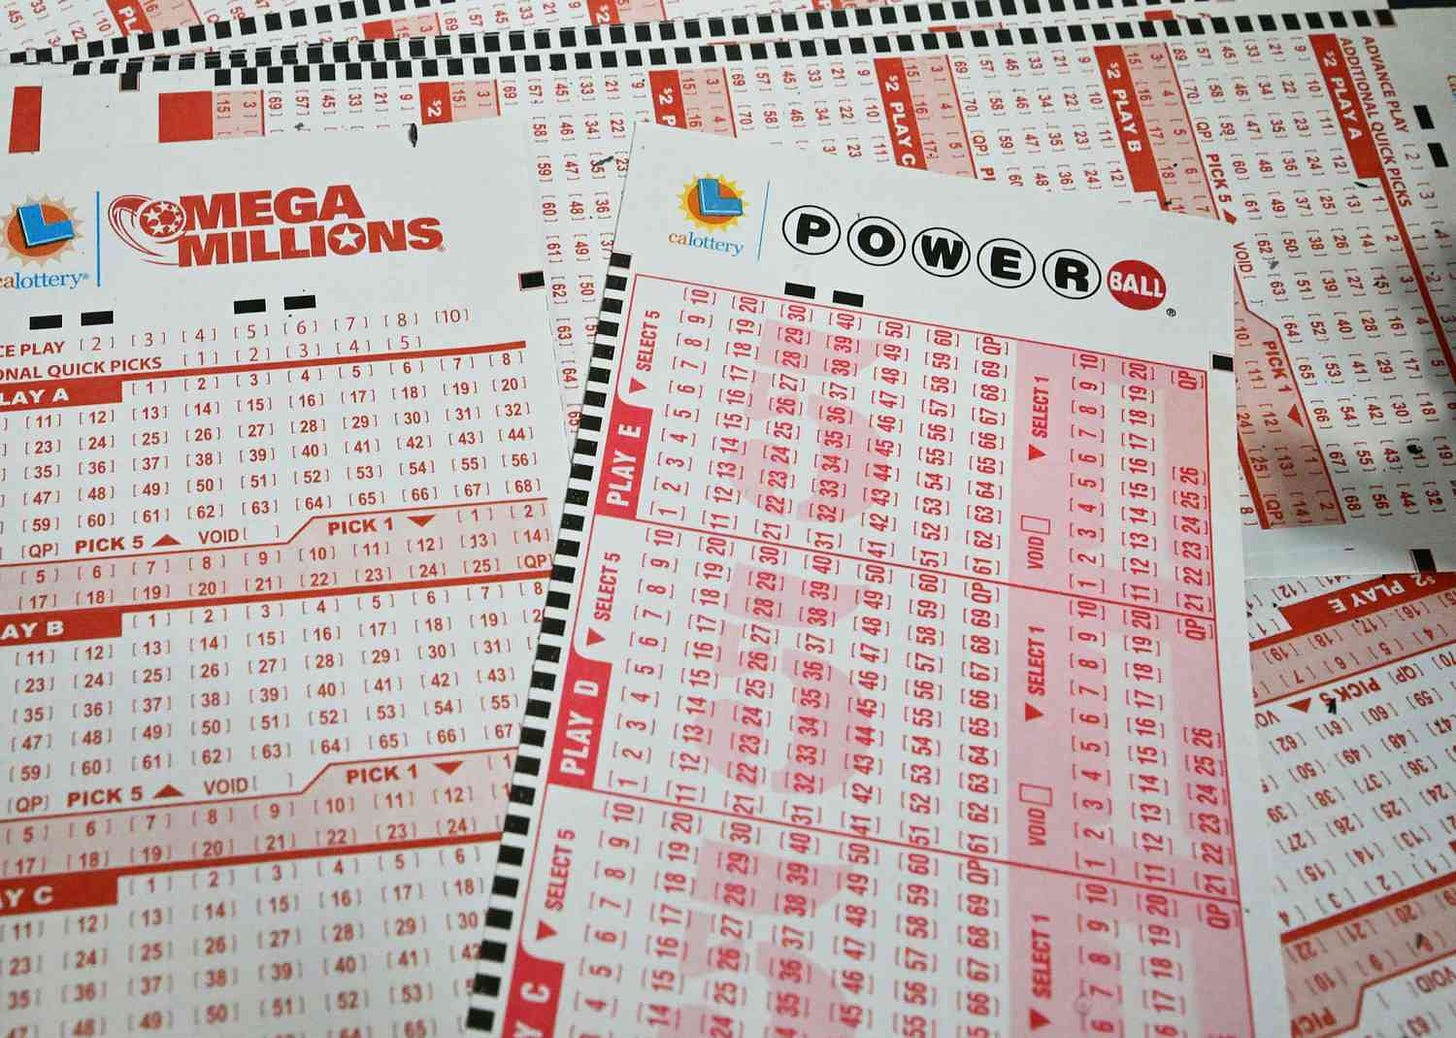 Man Sues Powerball for $340M After His Numbers 'Mistakenly Posted'